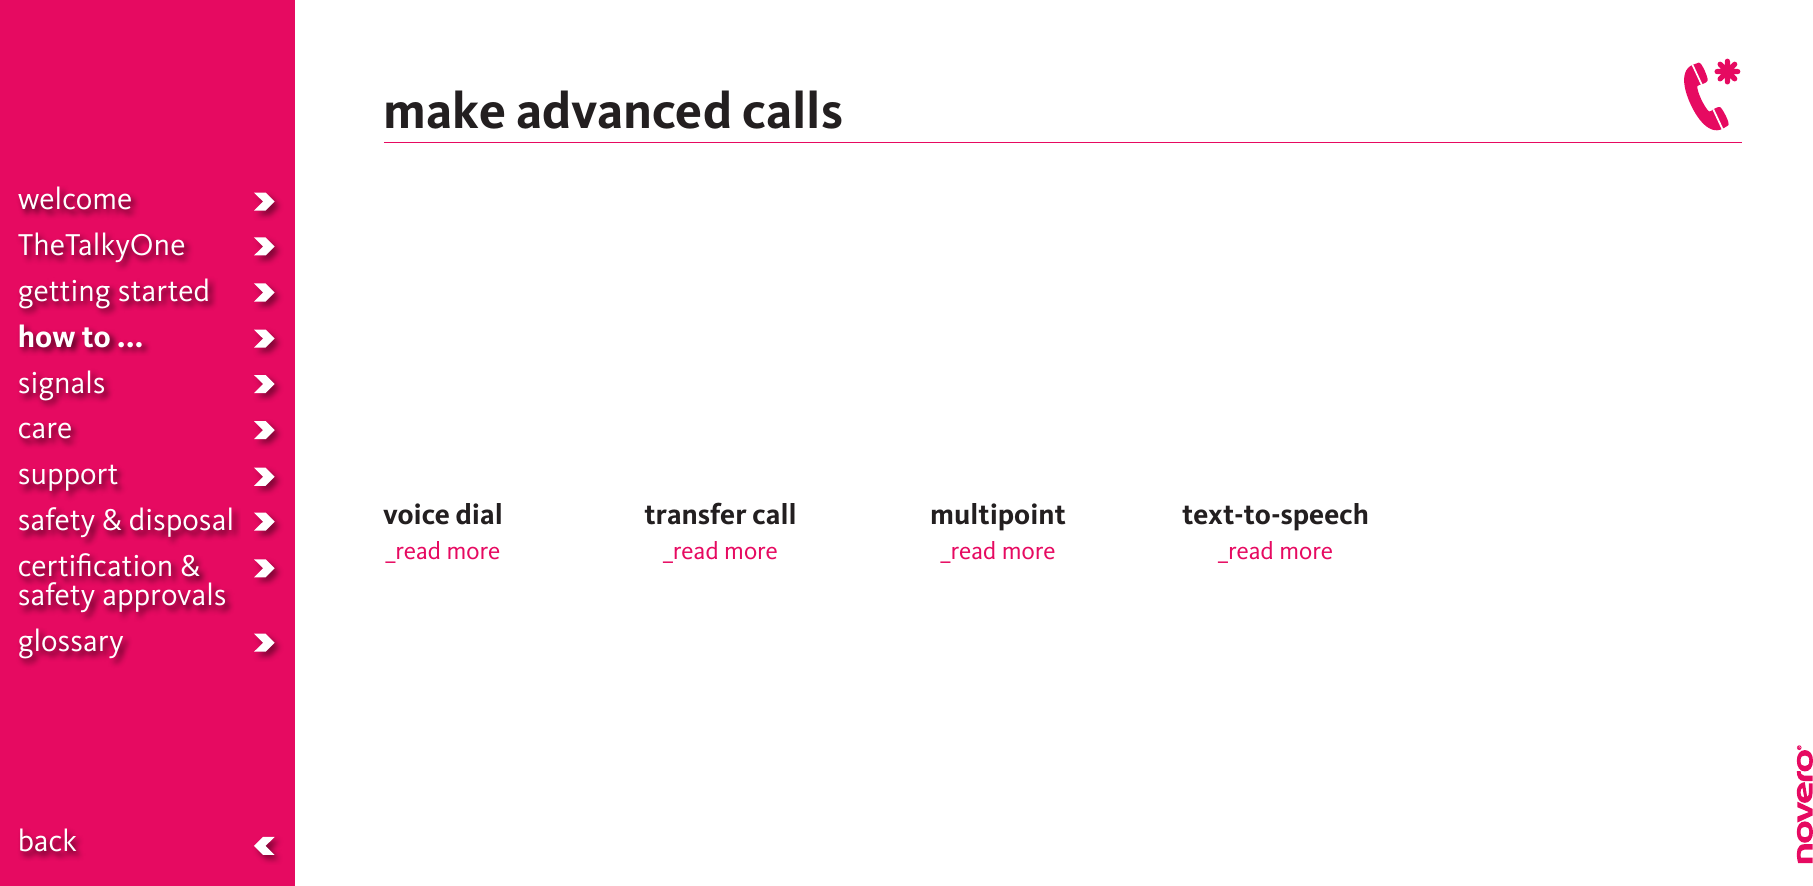 make advanced callsvoice dial_read moremultipoint_read moretransfer call_read morewelcomeTheTalkyOnegetting startedhow to ...signalscaresupportsafety &amp; disposalcertiﬁcation &amp;  safety approvals glossary  backtext-to-speech_read more